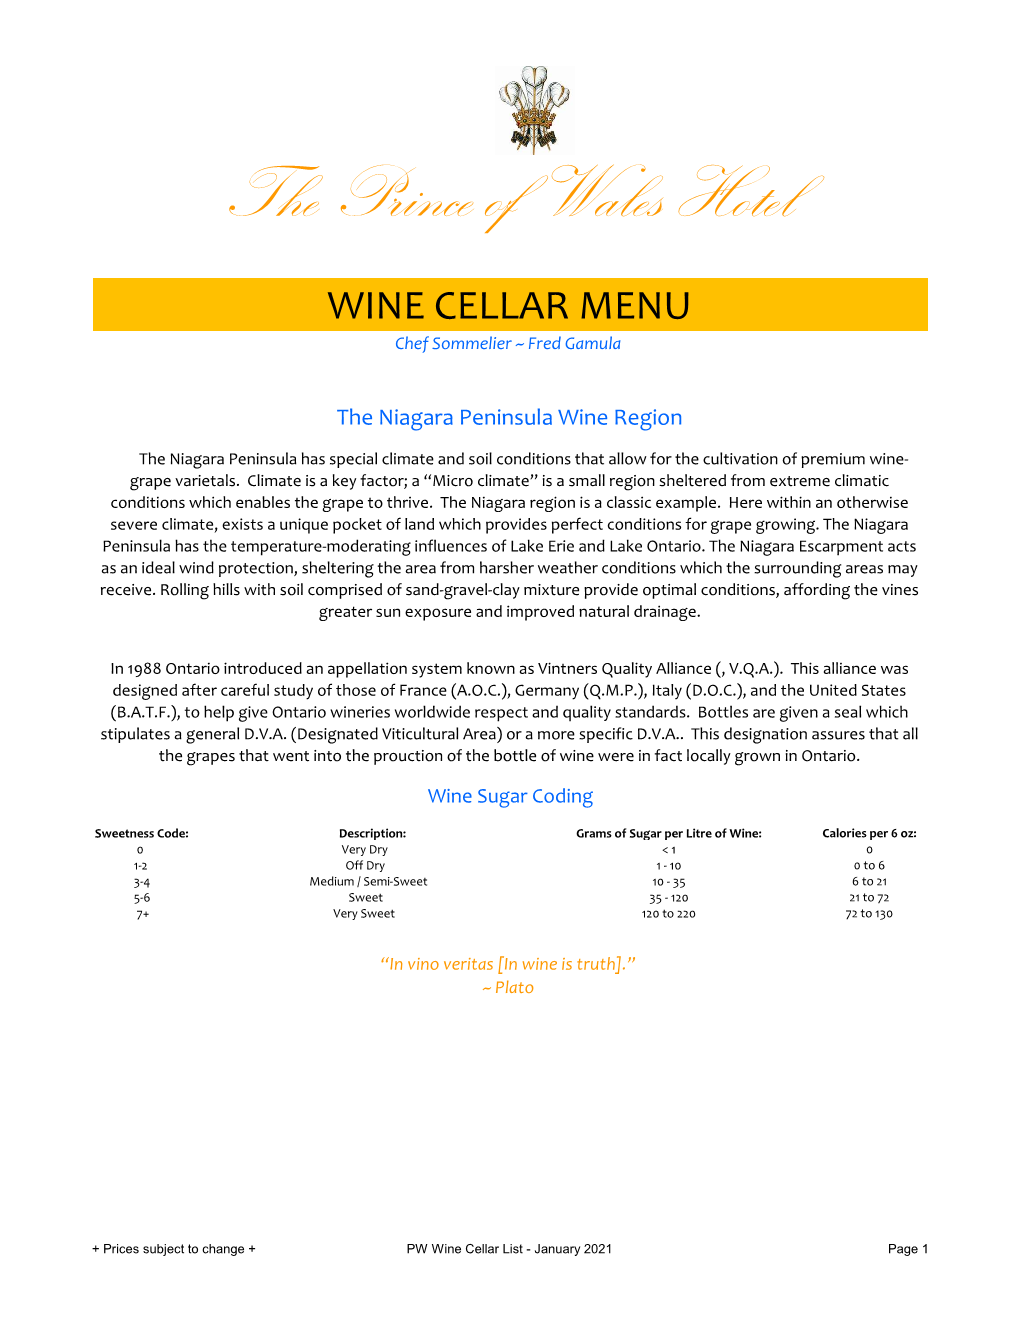 PW Wine Cellar List - January 2021 Page 1 by the GLASS